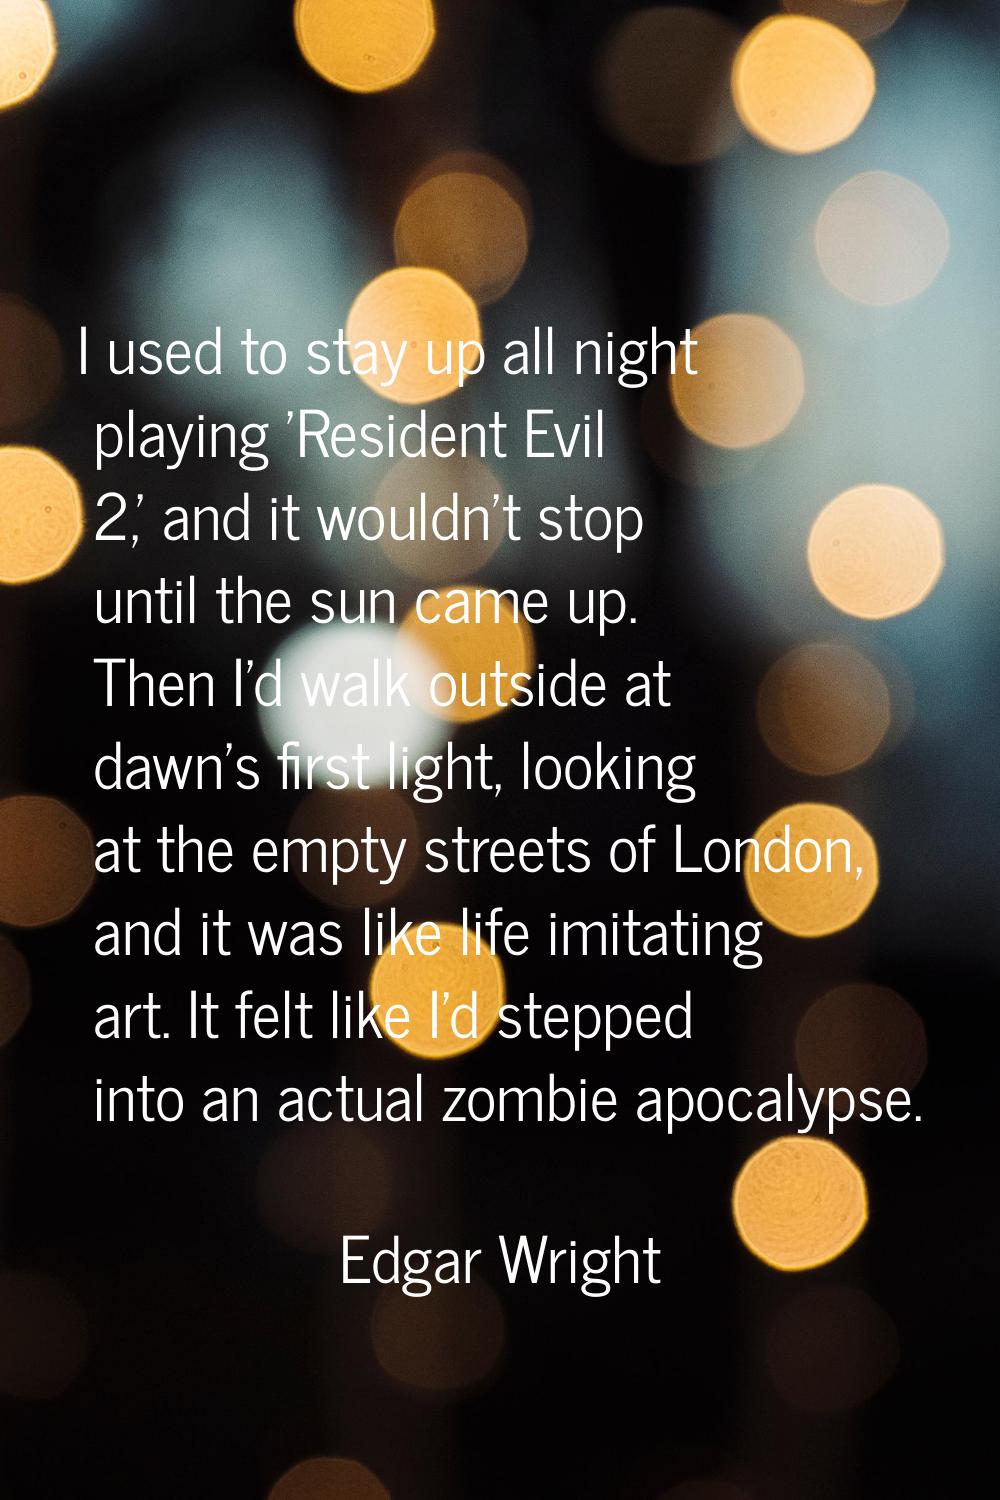 I used to stay up all night playing 'Resident Evil 2,' and it wouldn't stop until the sun came up. 